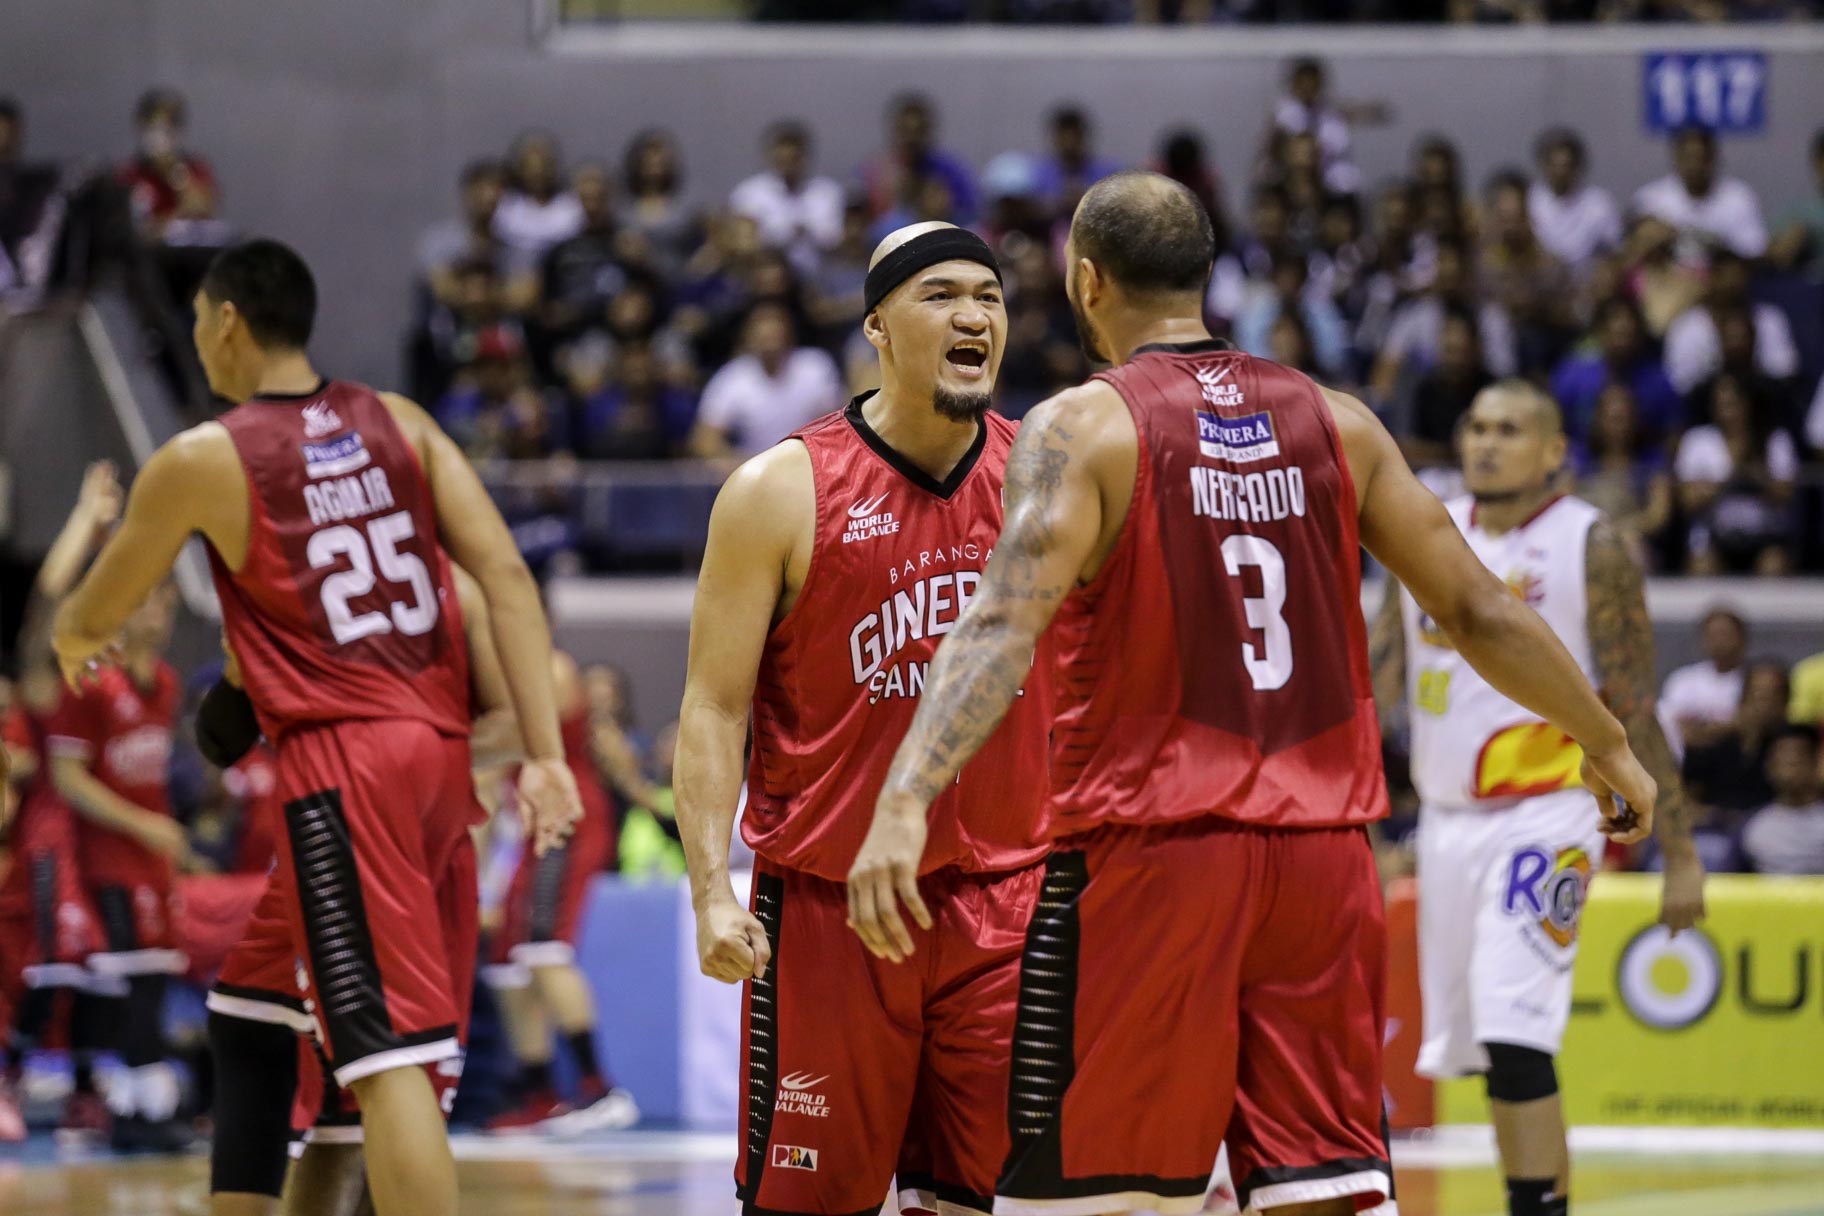 Mark Caguioa. Photo by Tristan Tamayo/INQUIRER.net